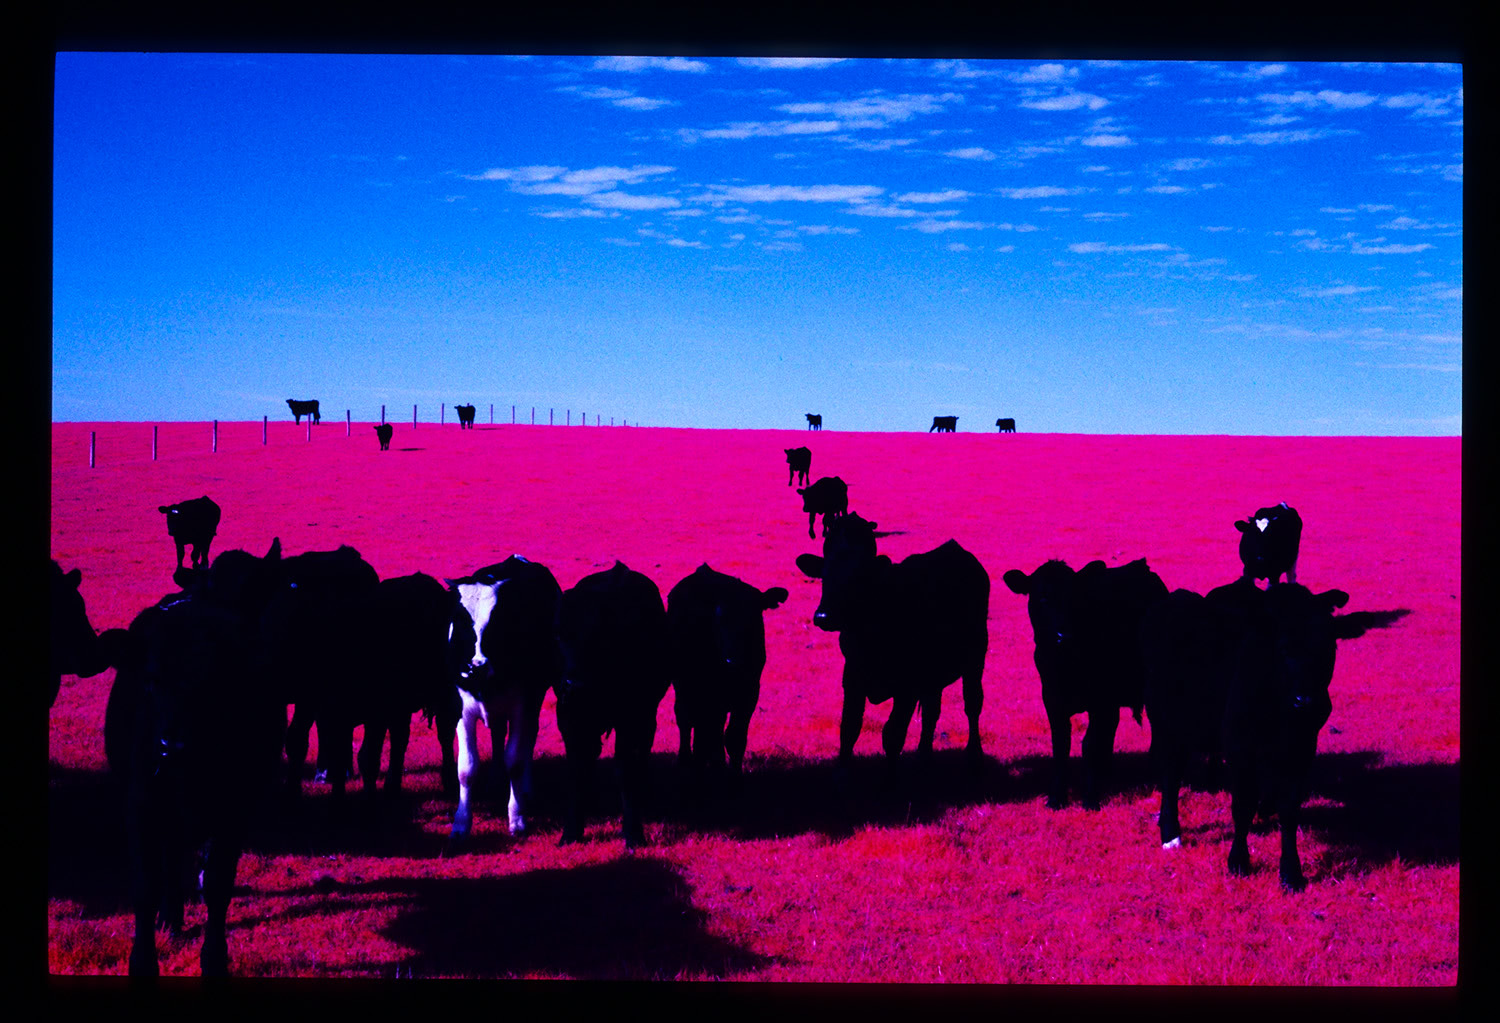 Cows in infrared landscape